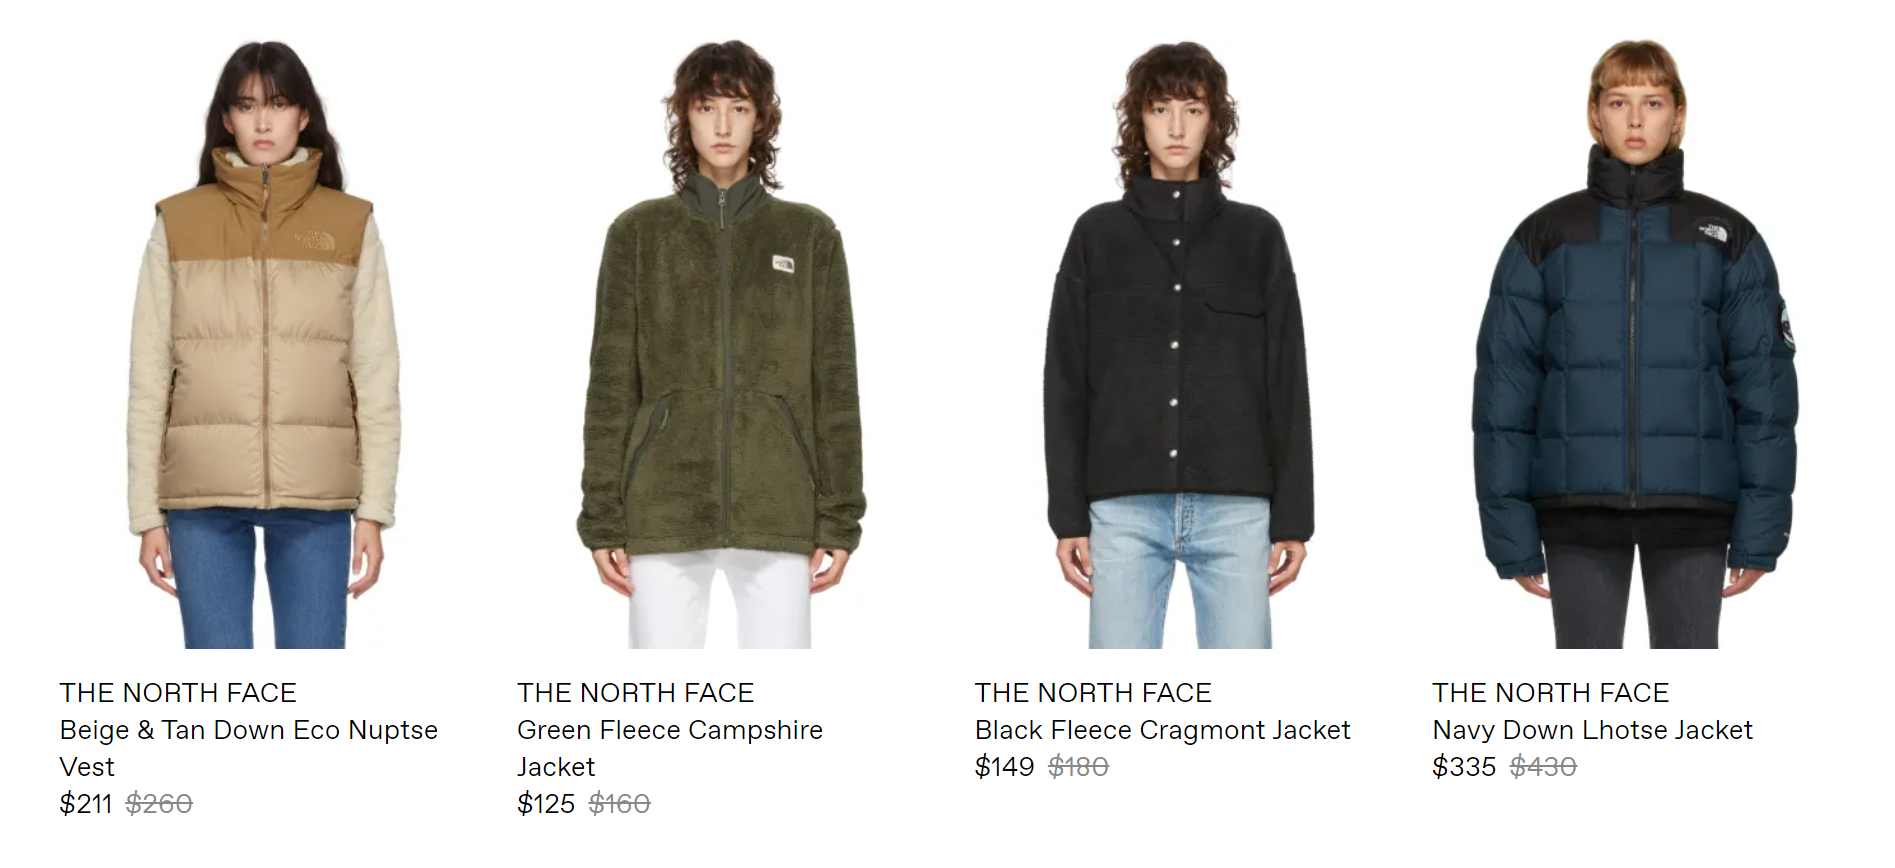 The North Face 卫衣羽绒服大促开启低至6.6折